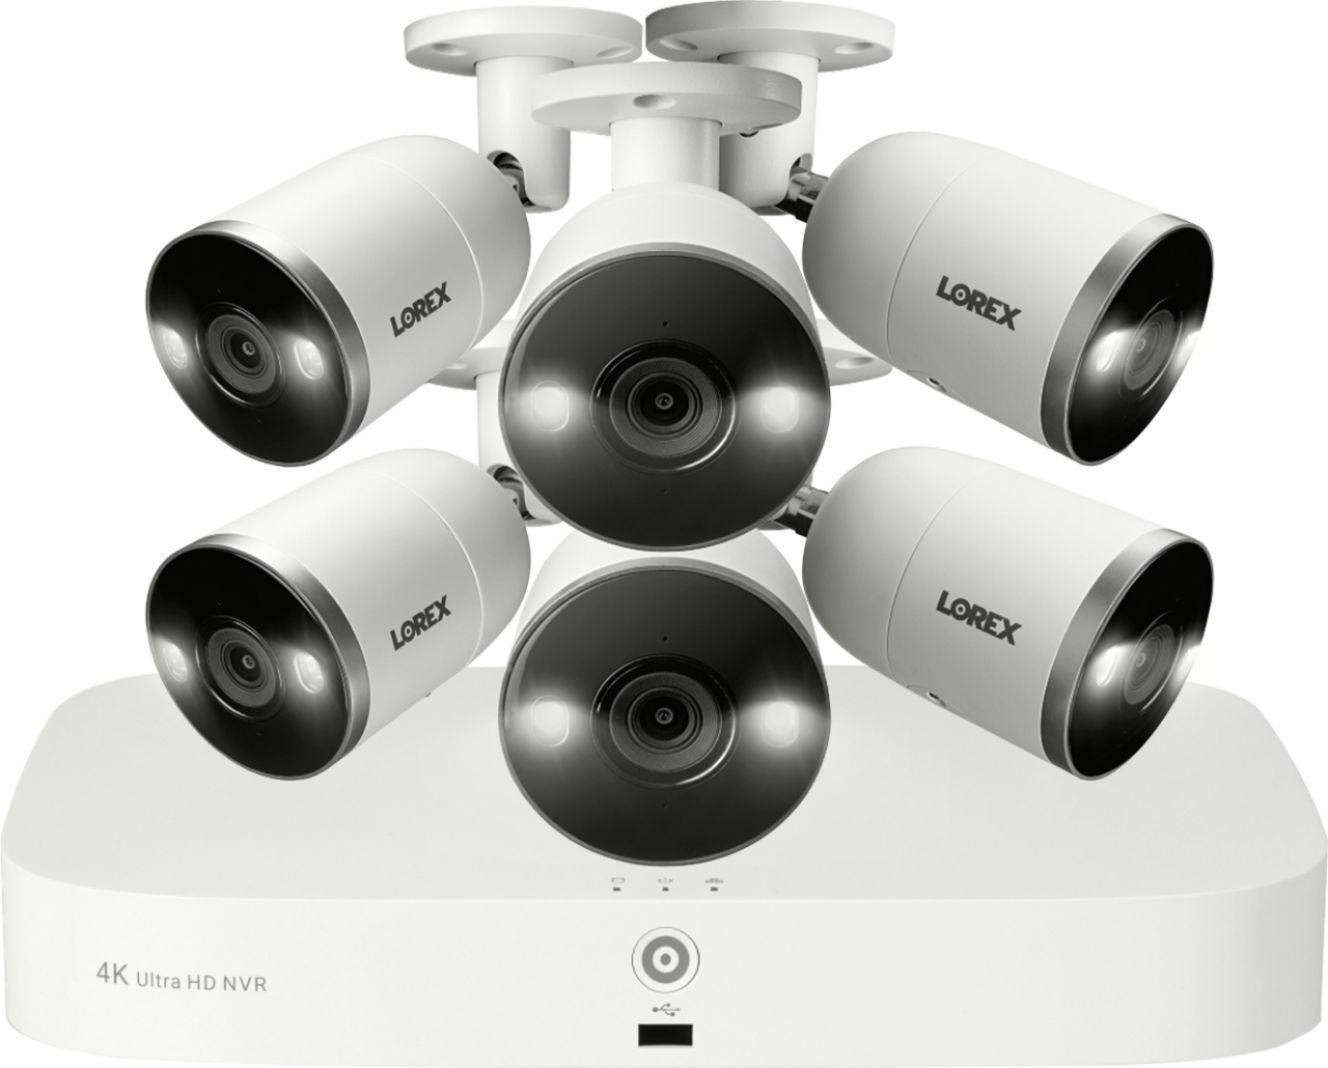 Lorex - 4K NVR Security System with 6 Smart Deterrence Cameras, Fusion Capabilities and Smart Motion Detection Plus - White